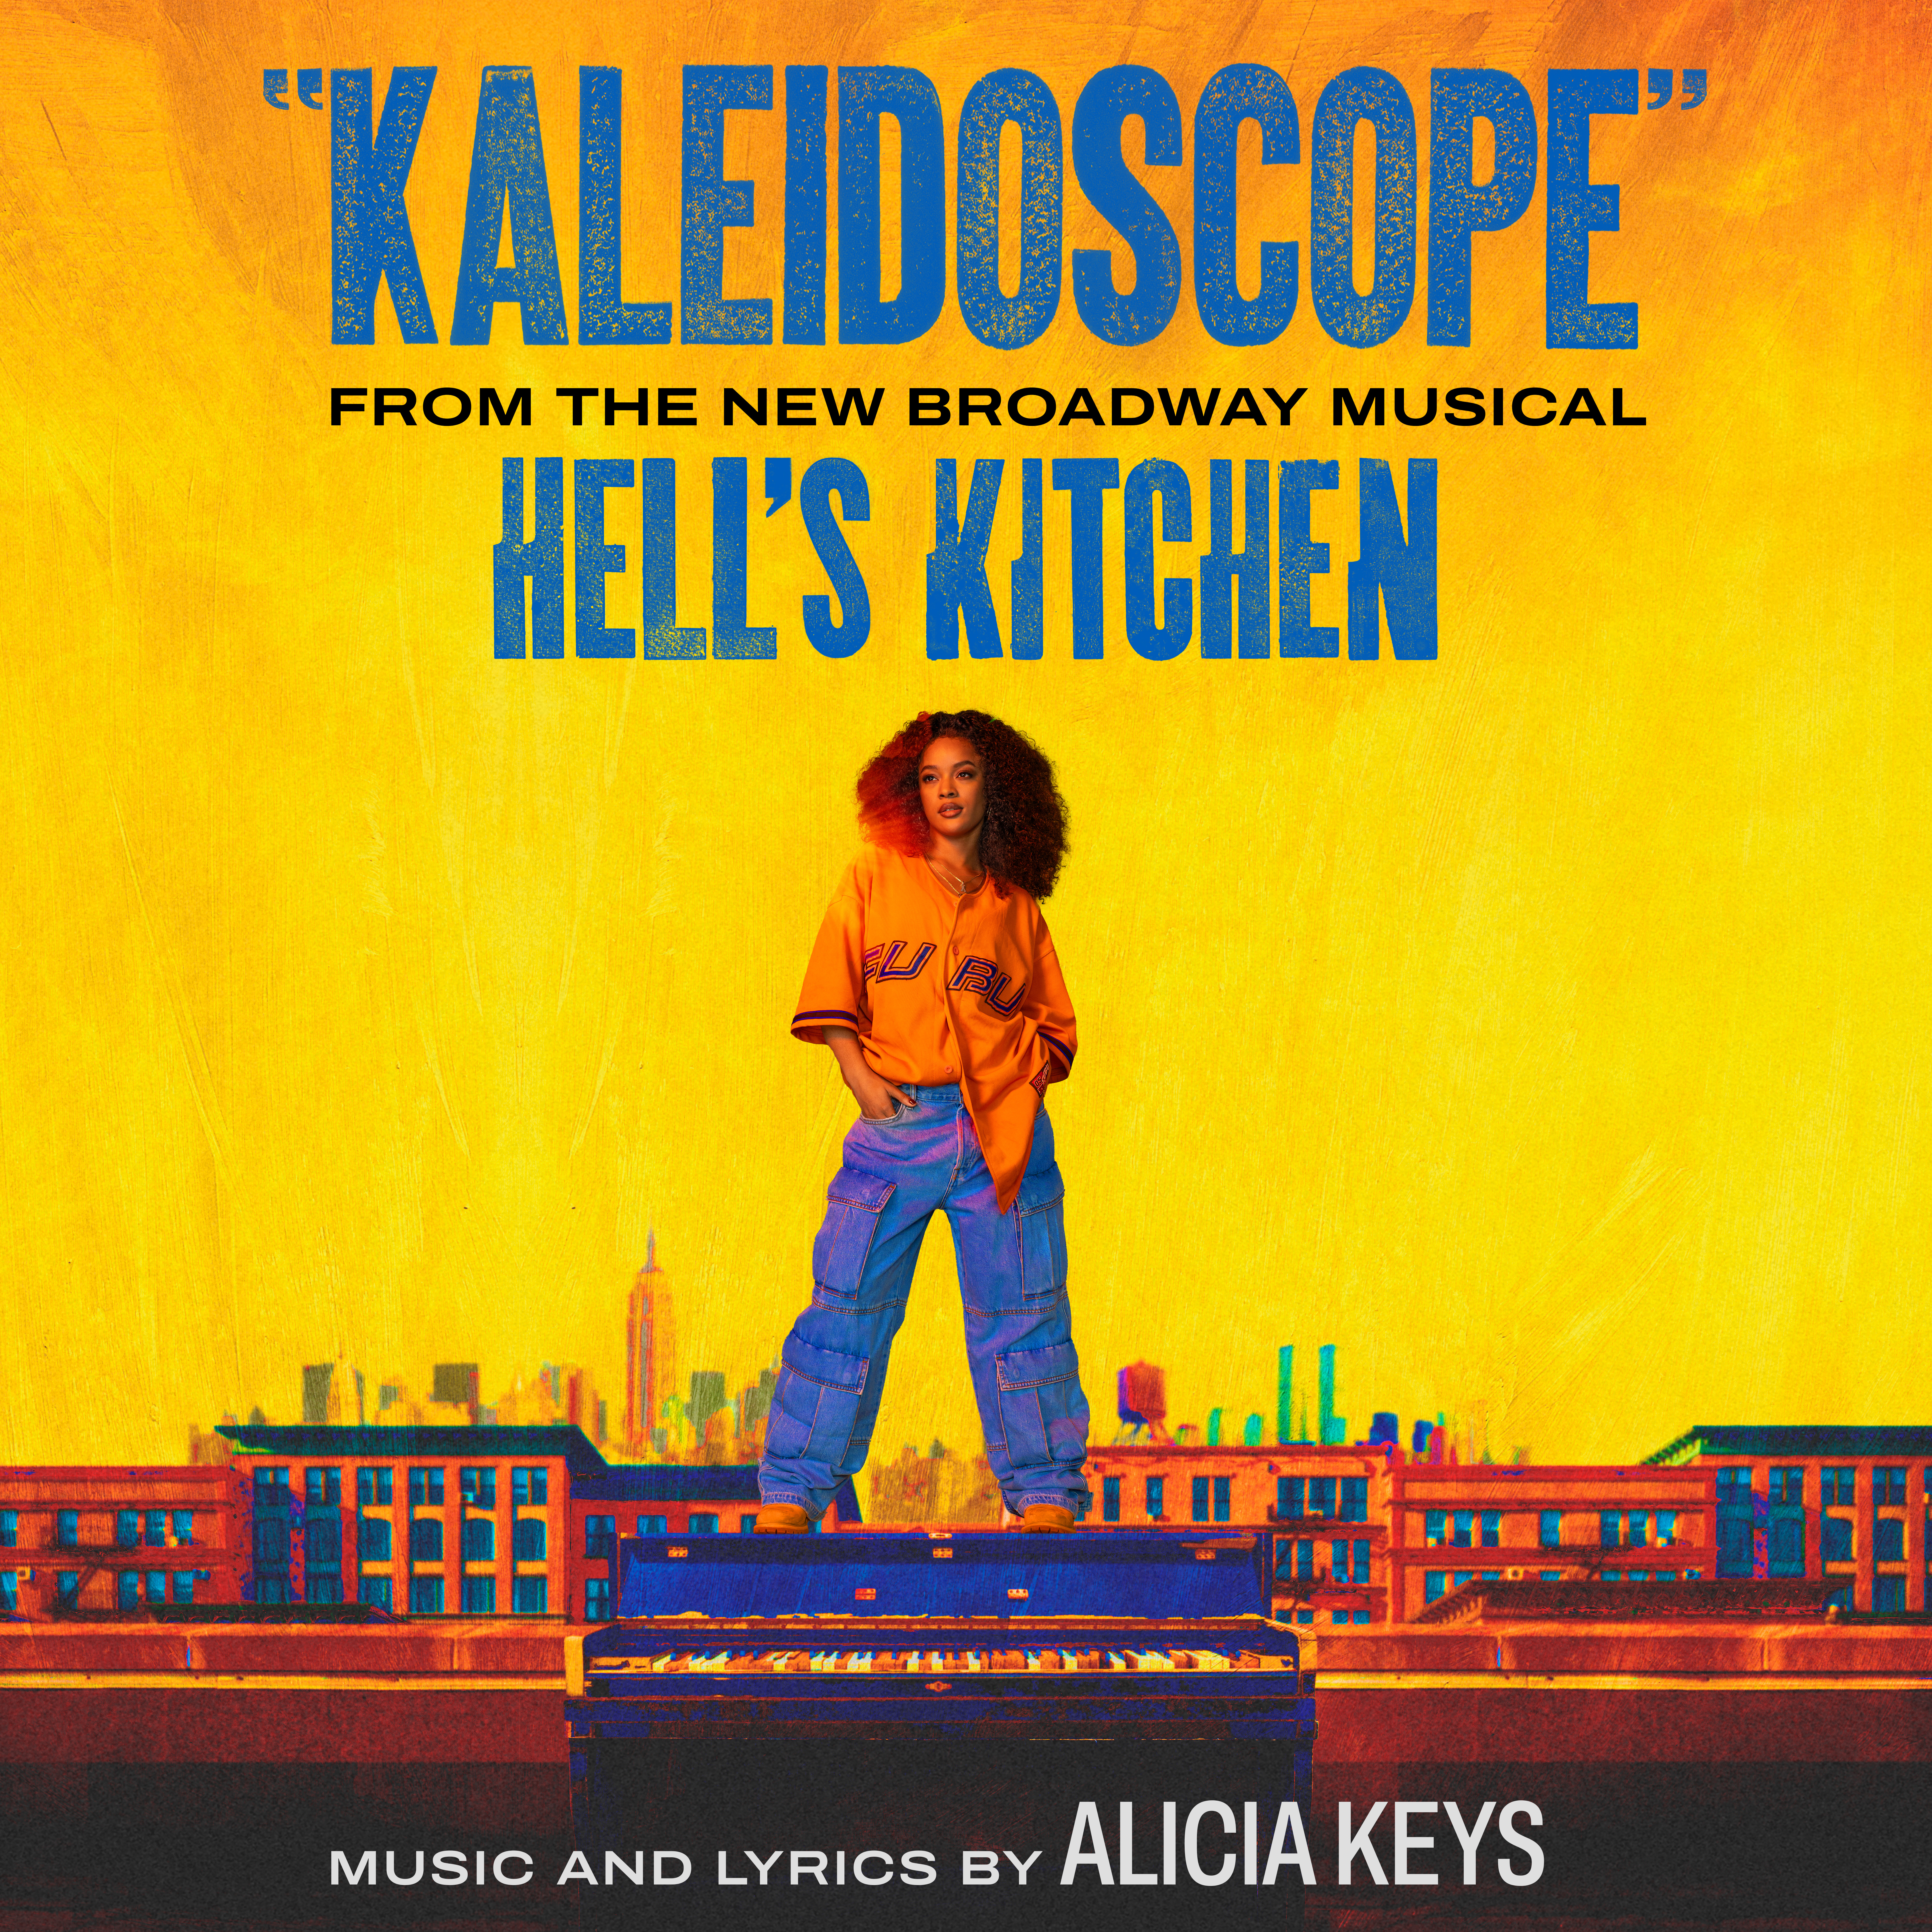 “Kaleidoscope” by Alicia Keys from the new Broadway musical Hell’s Kitchen. Listen and get tickets now!